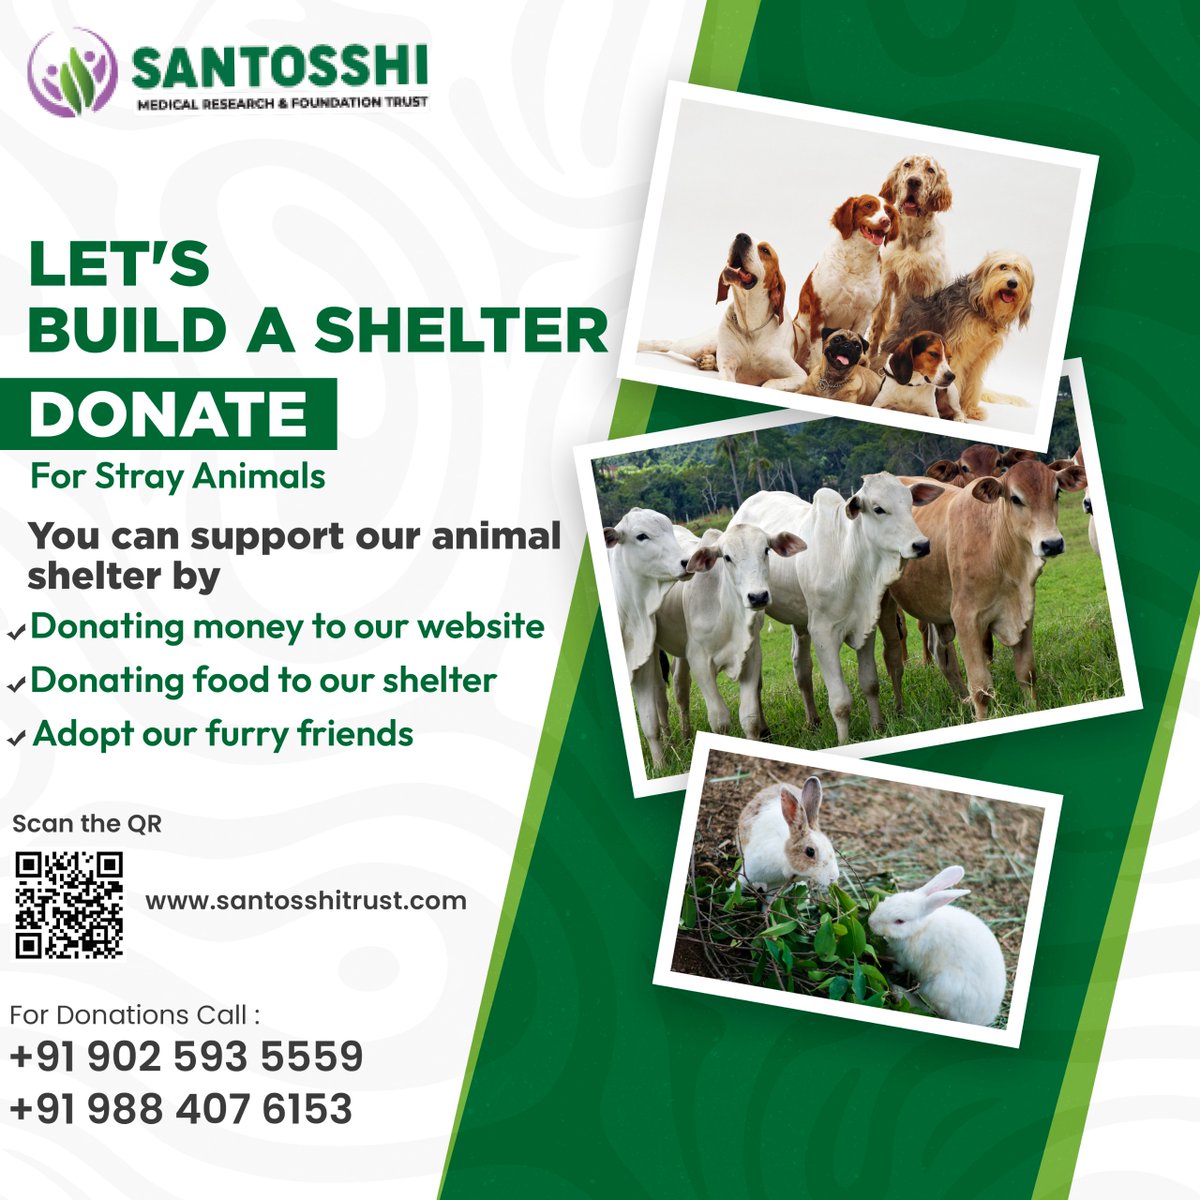 Help us build a shelter for stray animals and support our furry friends in need!
 For more information call Us:
9025935559, 9884076153

Visit us : santosshitrust.com

#SantoshiMedicalResearchFoundationHyderabad #AnimalShelter #SupportStrayAnimals #DonateForACause